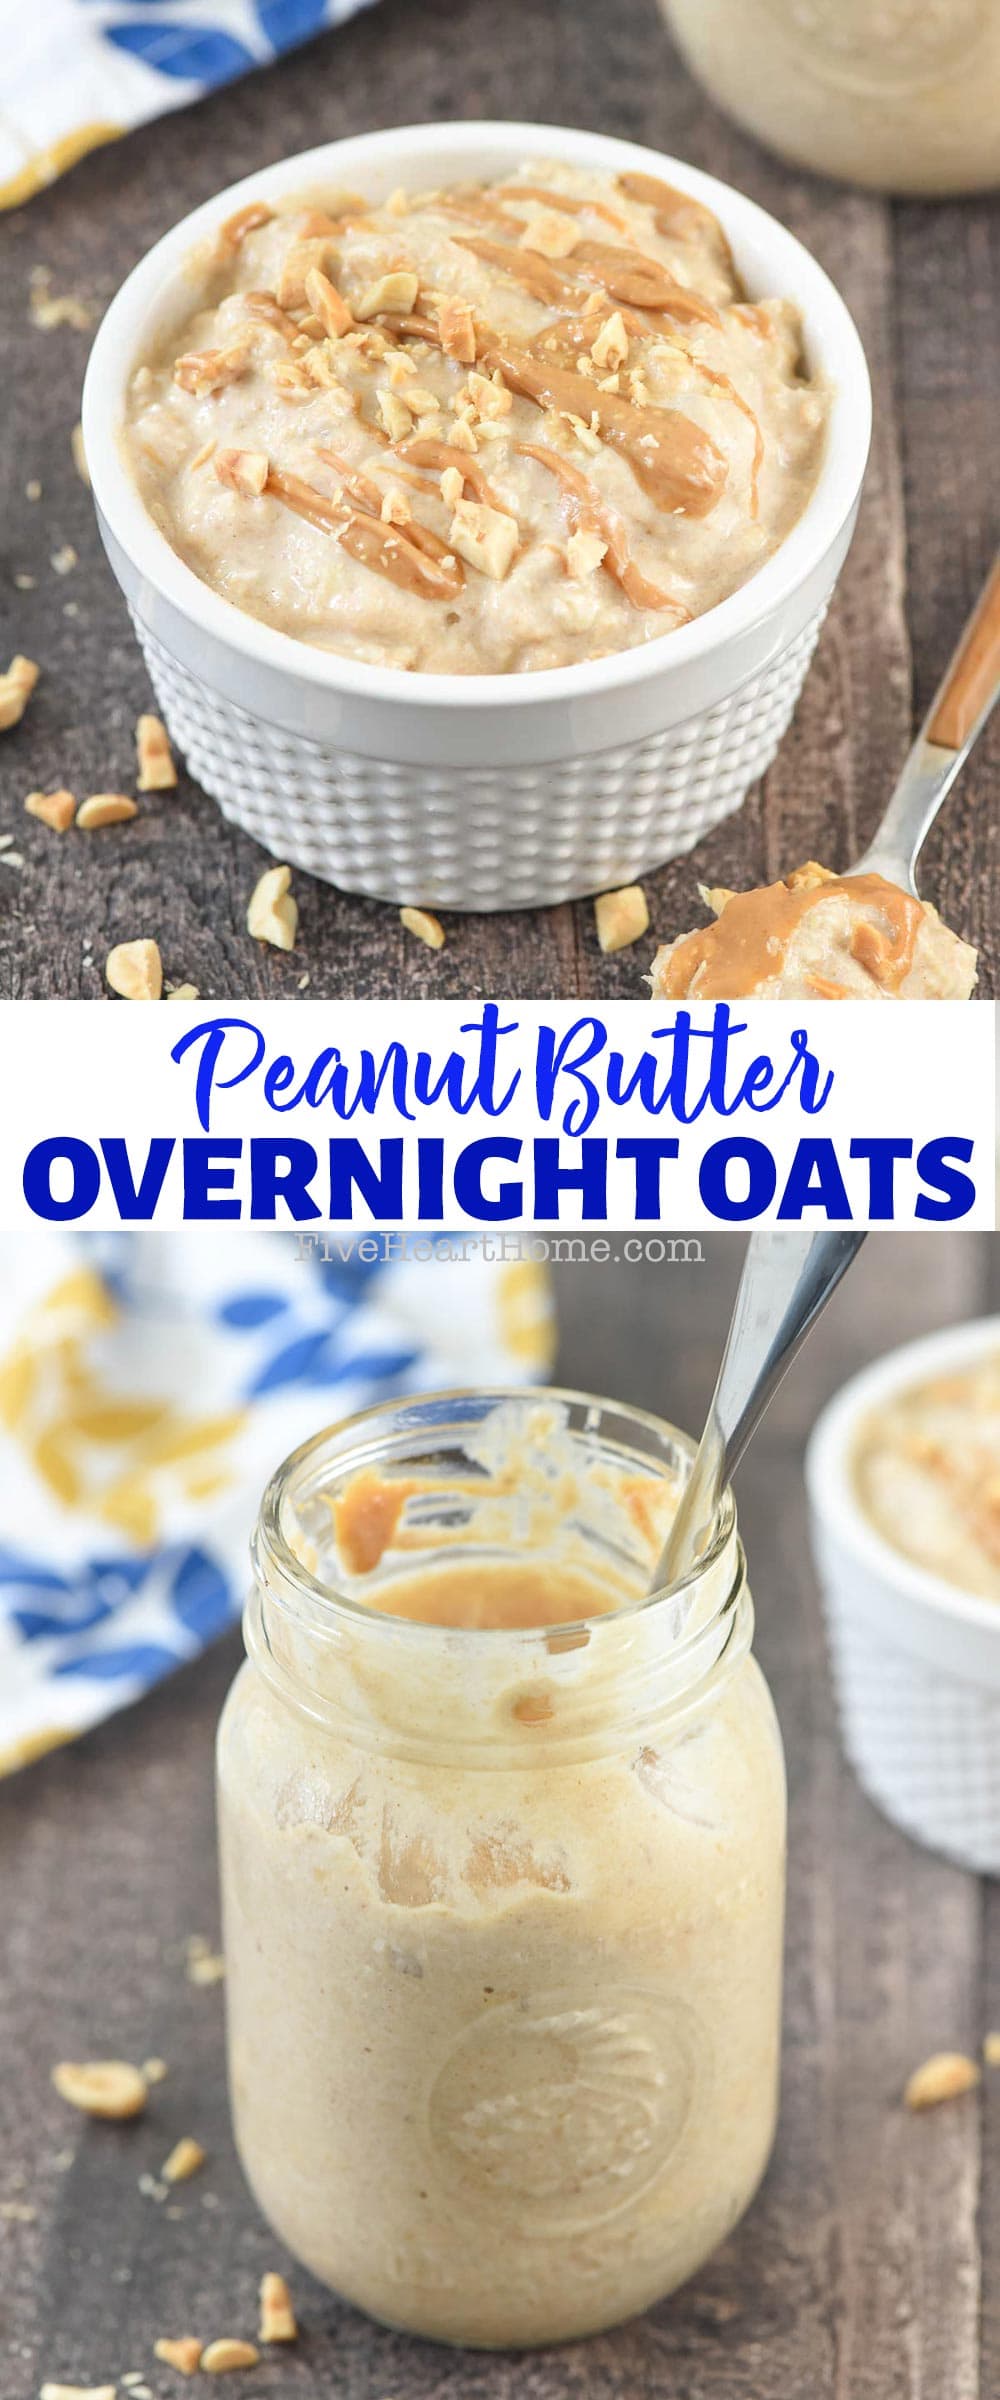 Peanut Butter Overnight Oats ~ this healthy recipe is quick and easy to make and pop in the fridge the night before for a wholesome, filling, and nourishing breakfast that’s ready to eat in the morning! | FiveHeartHome.com via @fivehearthome